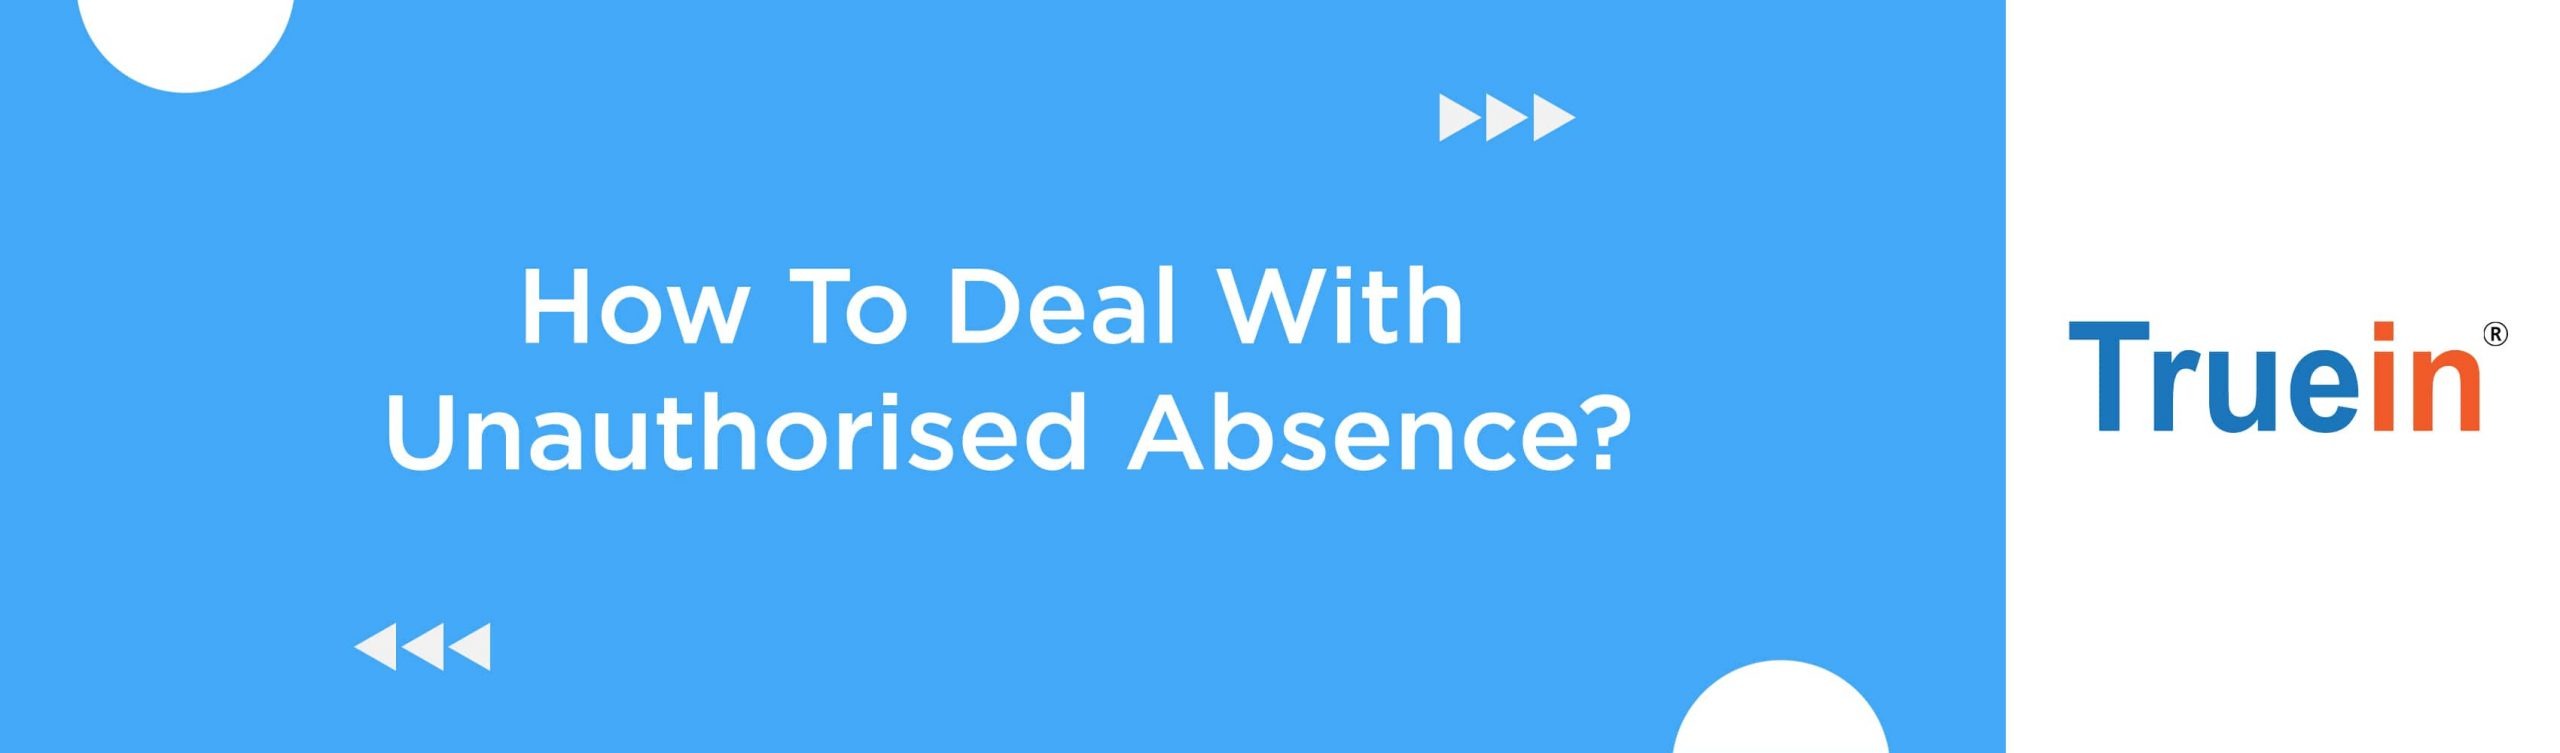 How To Deal With Unauthorised Absence?